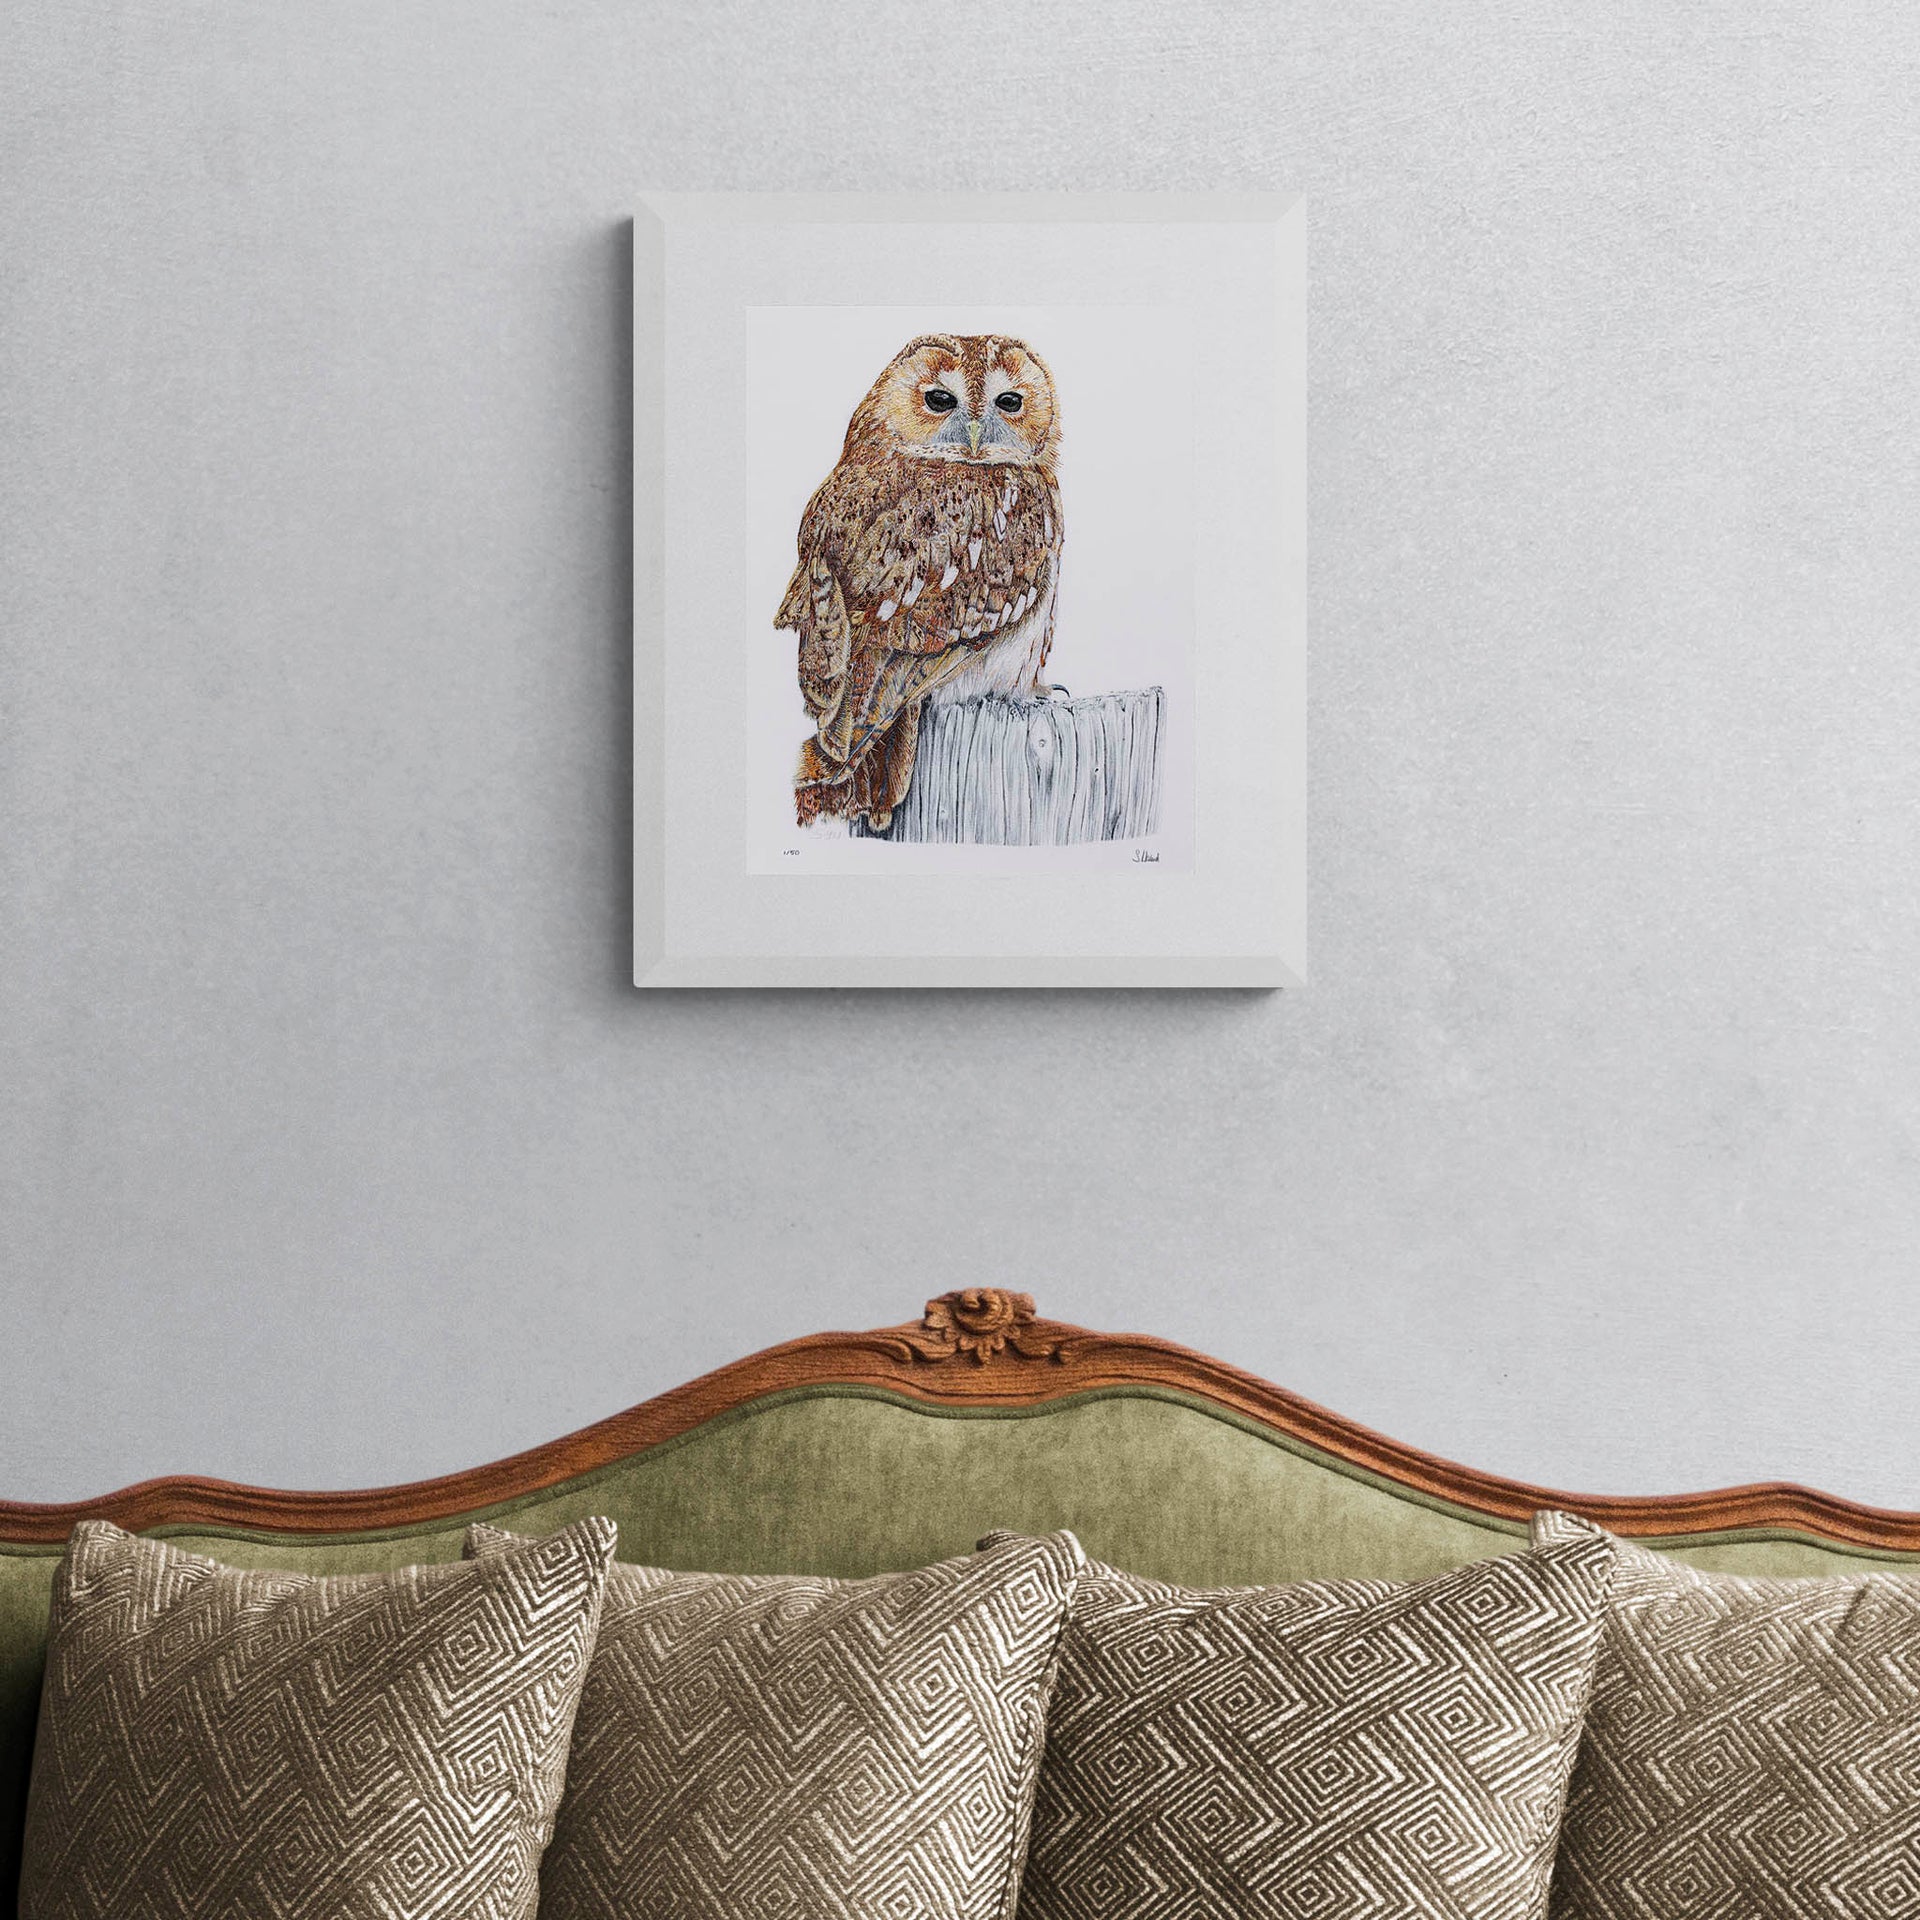 limited edition print of a Owl hand embroidery on the wall